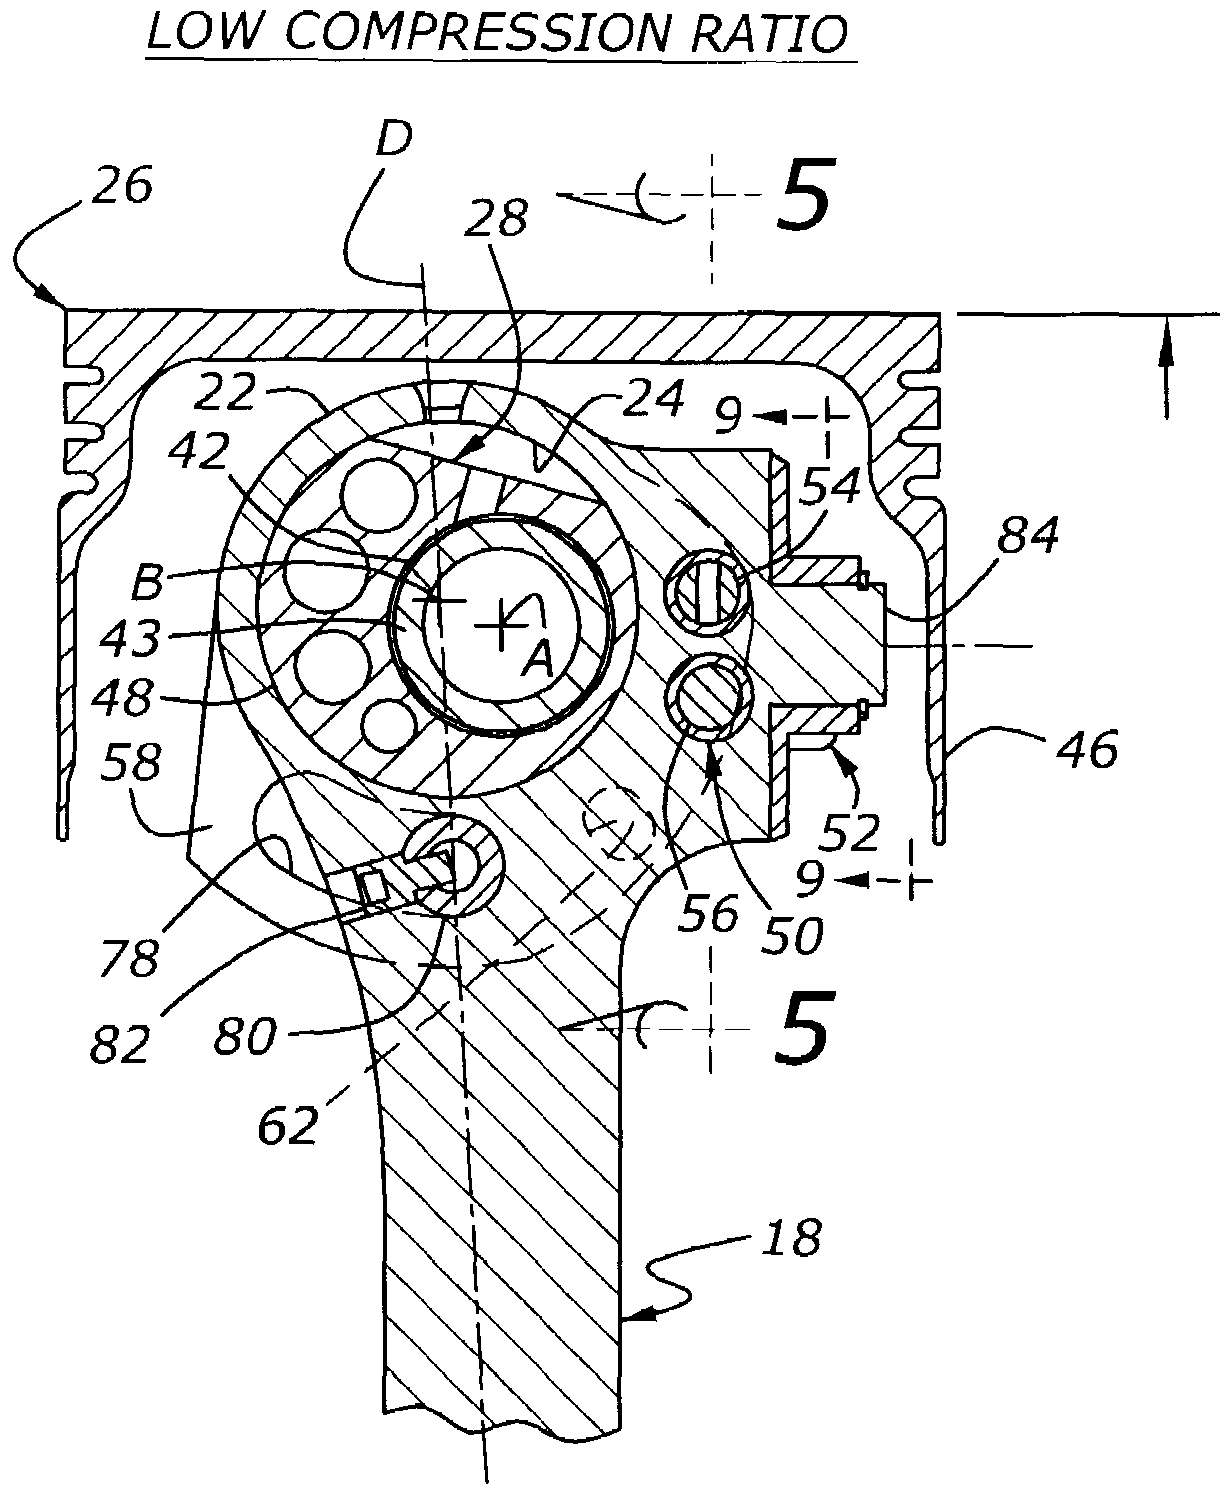 Variable compression ratio engine with dedicated bumper